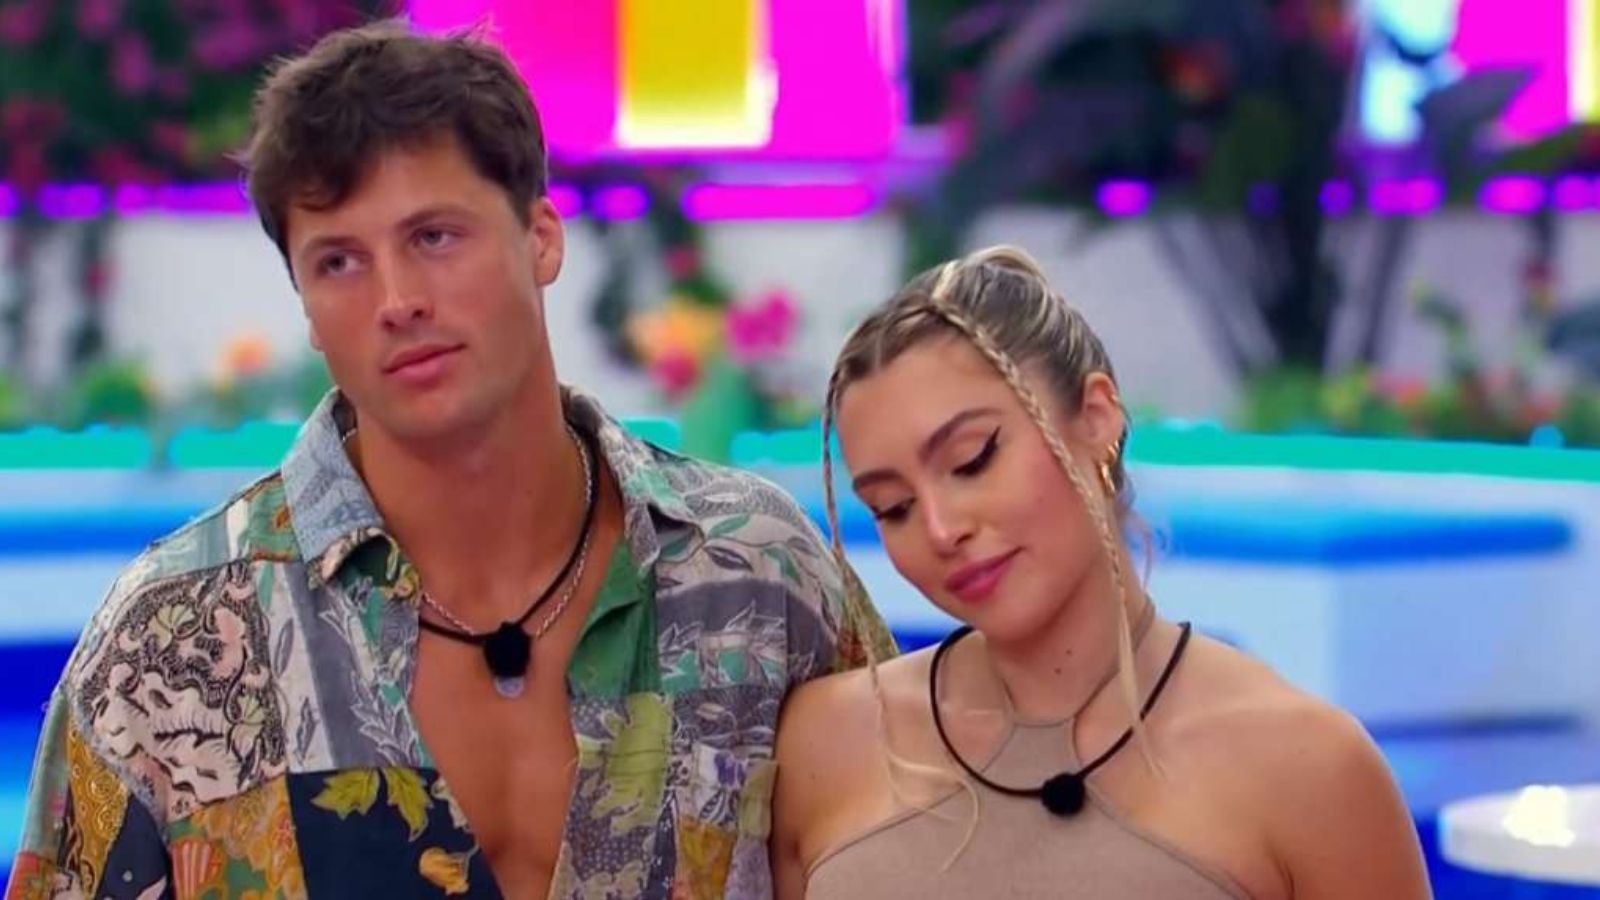 Love Island USA fans are angry because the sex bomb of season 6 is a victim of cyberbullying